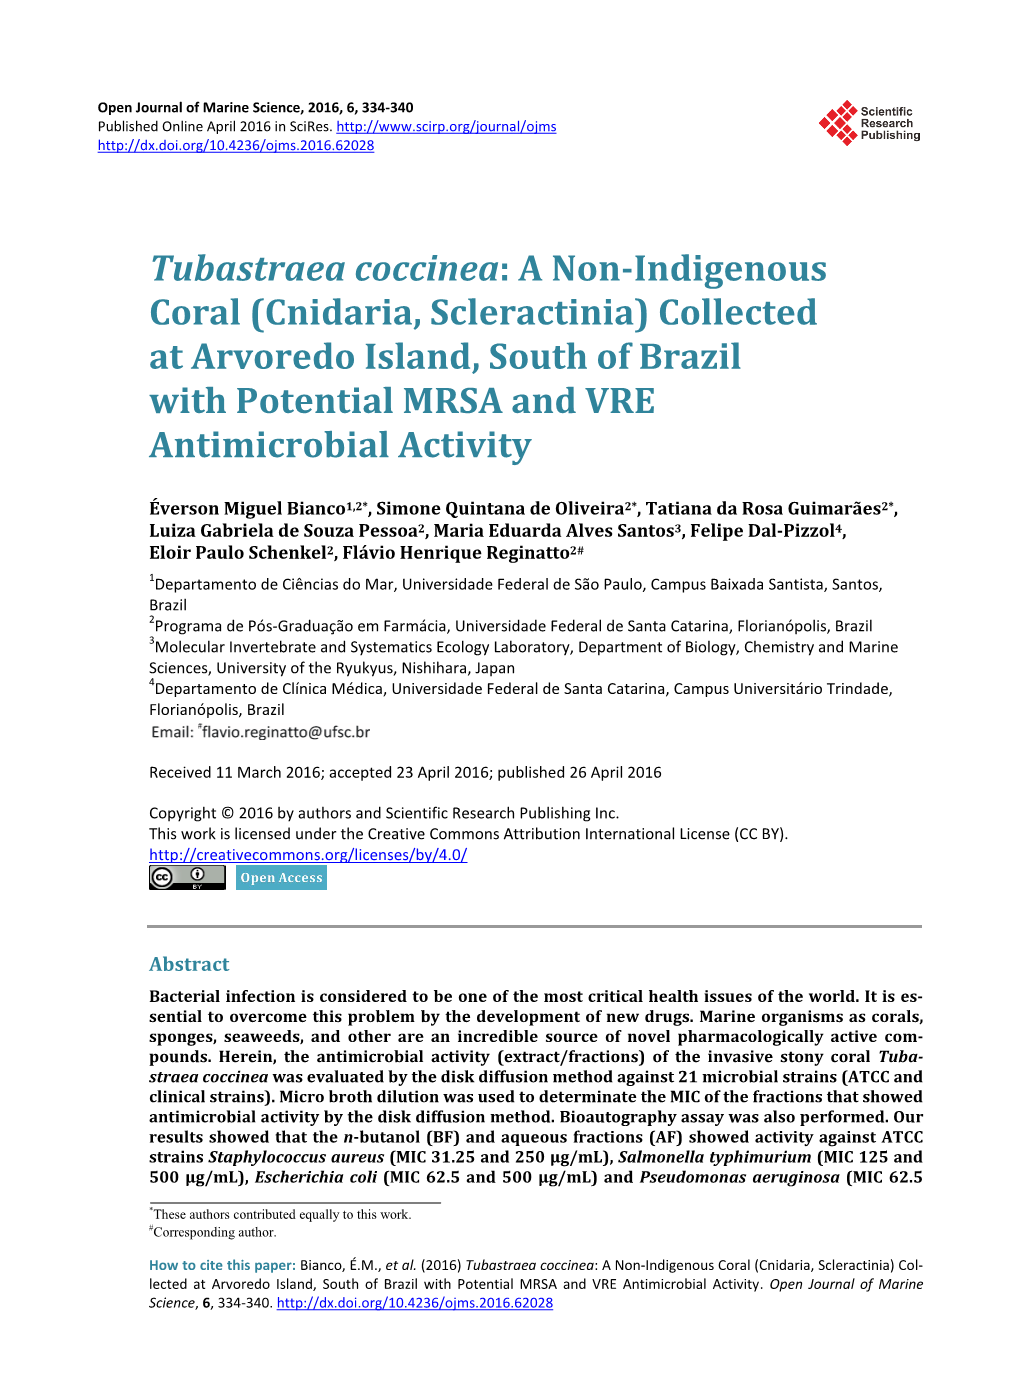 Tubastraea Coccinea: a Non-Indigenous Coral (Cnidaria, Scleractinia) Collected at Arvoredo Island, South of Brazil with Potential MRSA and VRE Antimicrobial Activity